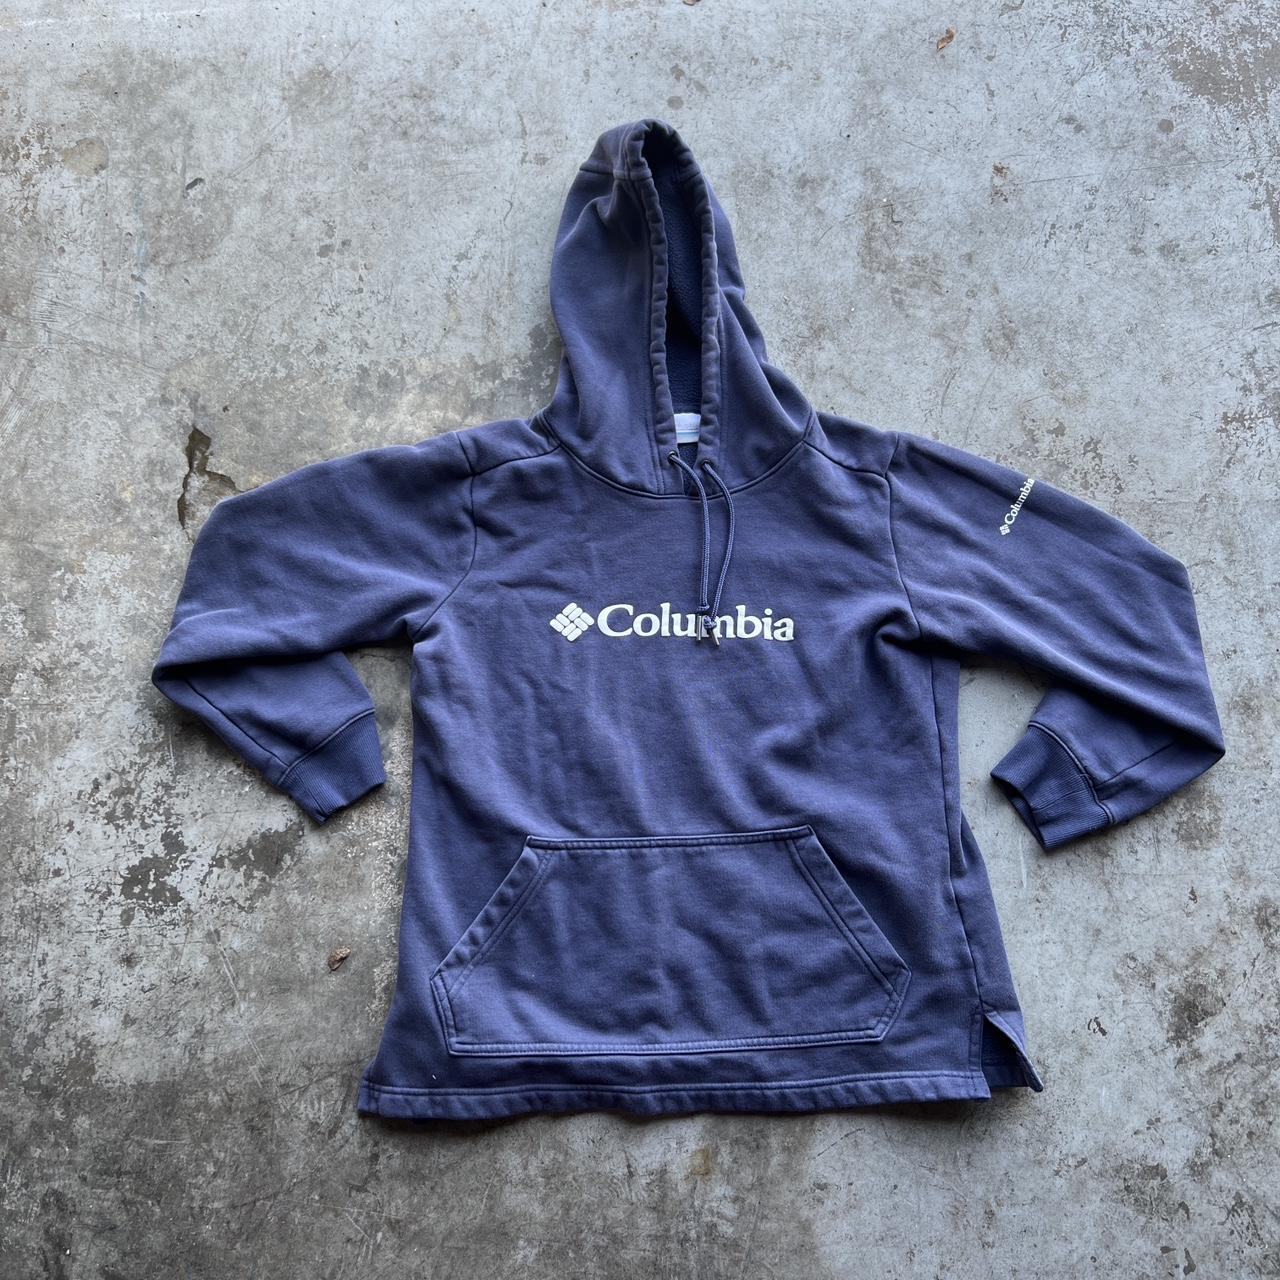 blue columbia vintage hoodie size small pit to pit:... - Depop